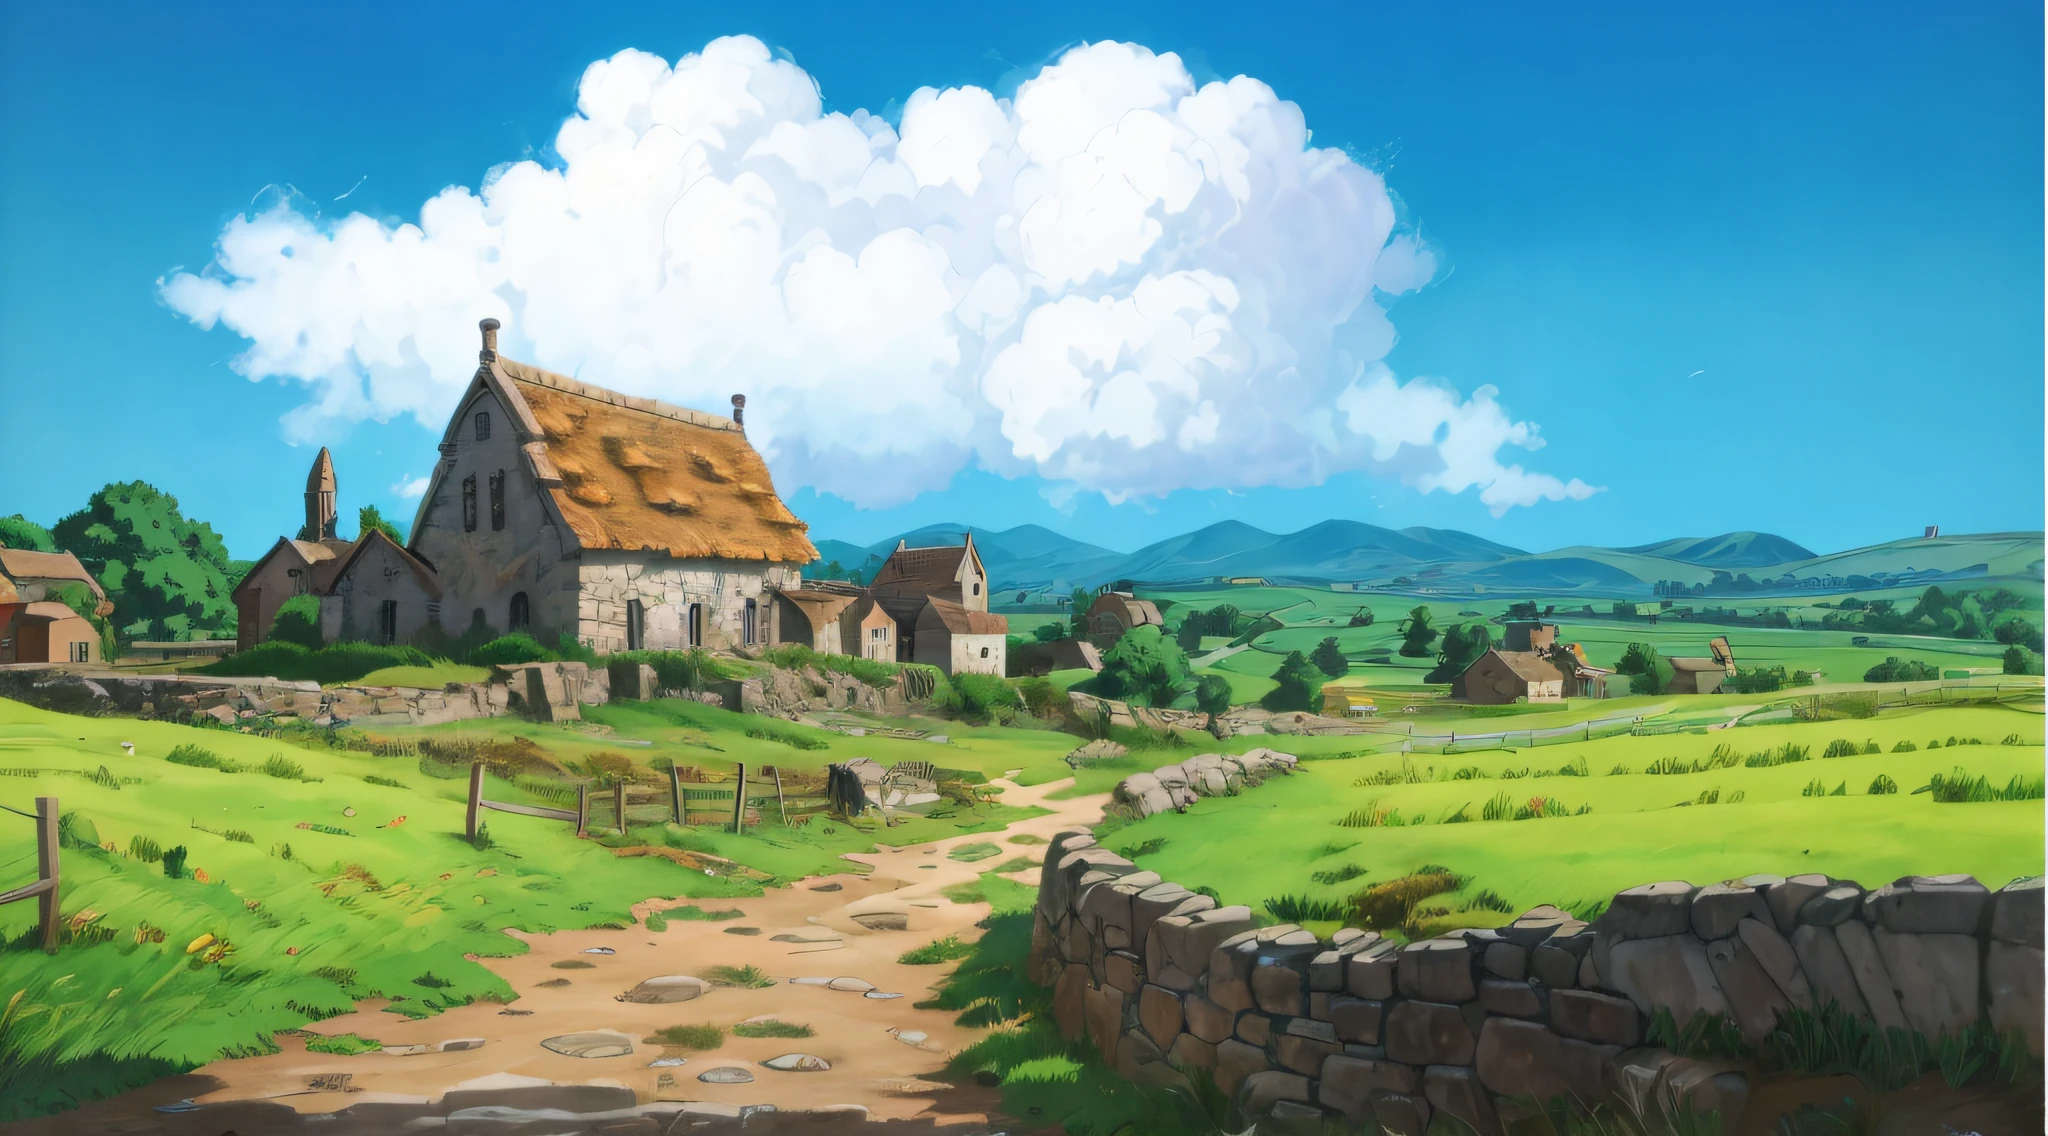 tmasterpiece，k，Countryside painted with stone walls and stone fences, anime countryside landscape, distant village background, Anime background art, Anime landscape concept art, beautiful anime scenery, Anime landscapes, medieval village on the plains, town background, Anime landscape, Countryside, anime landscape wallpapers, arte de fundo, anime backgrounds, amazing wallpapers, countryside city scene, landscape artwork, background artwork，super detailed,vivid color，studio lighting,professional photography,uhd